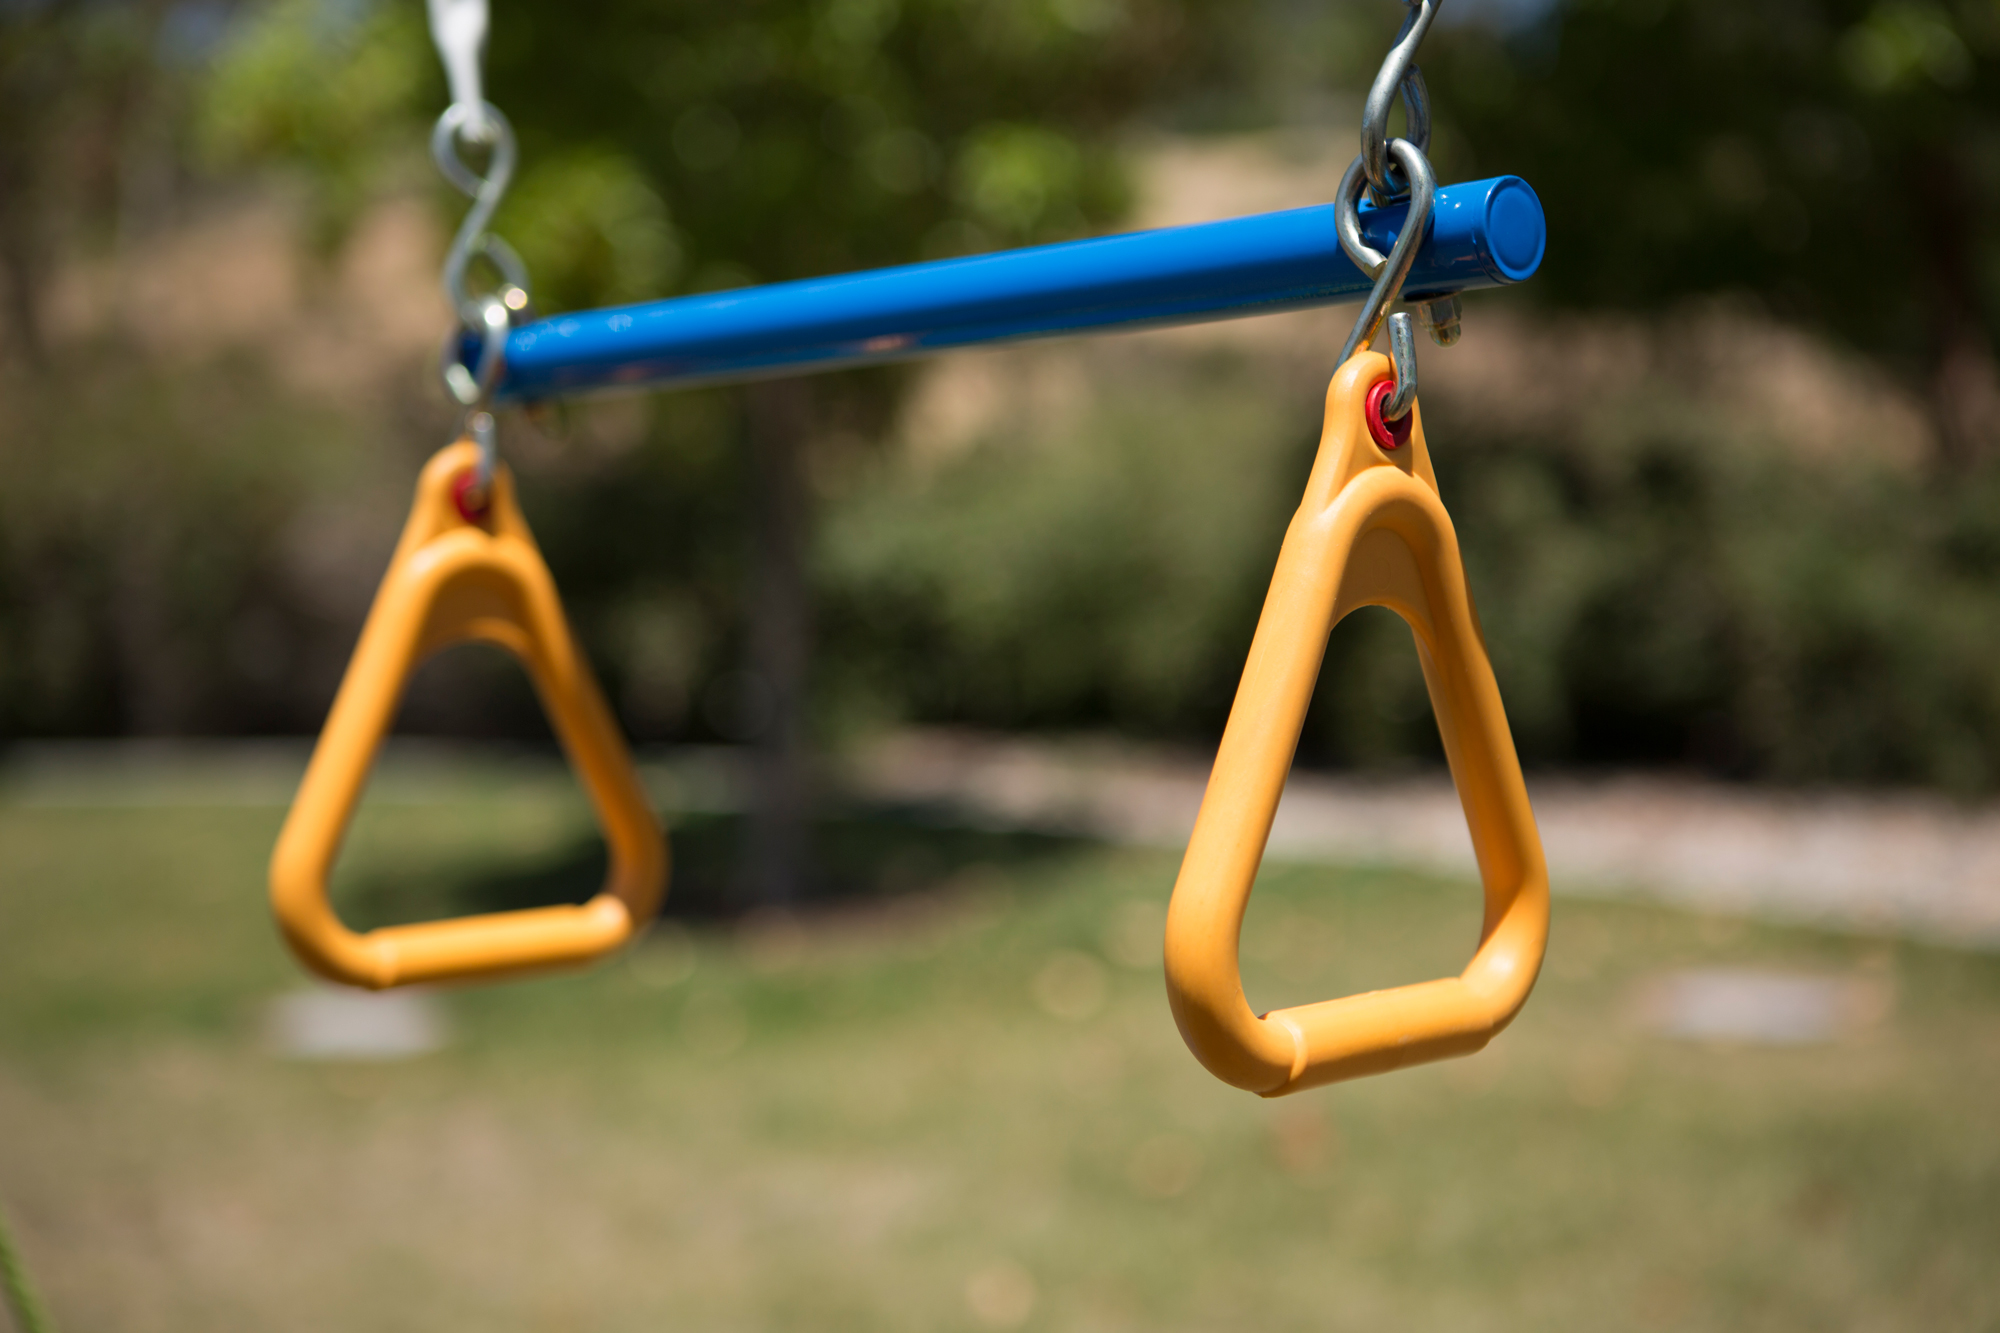 Fitness Reality Kids 'The Ultimate' 8 Station Sports Series Metal Swing Set with Basketball and Soccer - image 12 of 16